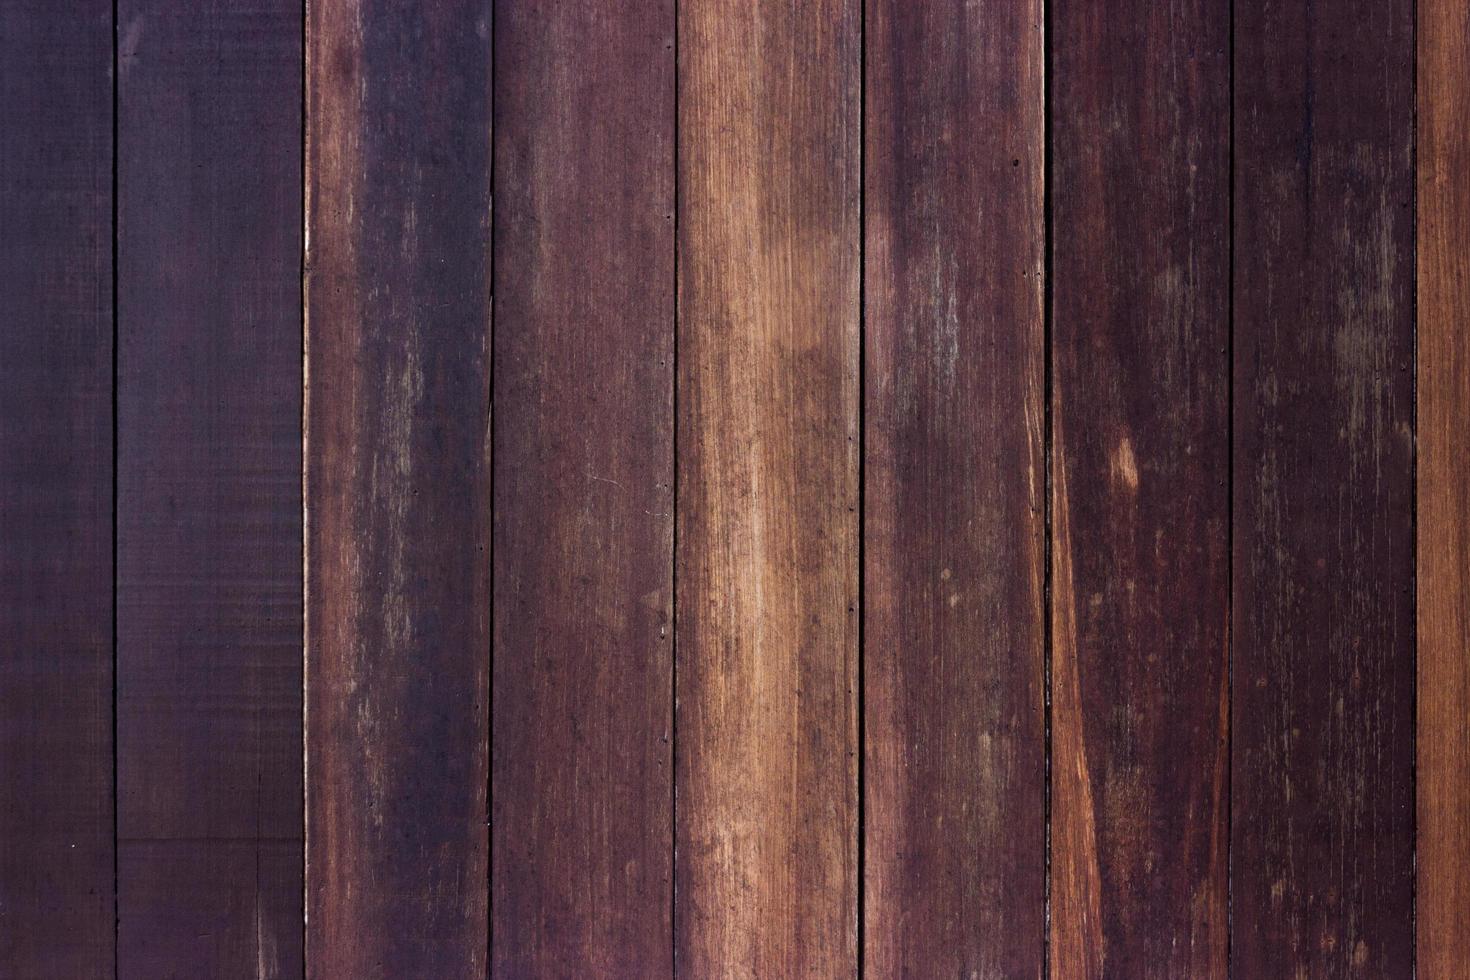 Wood slats wall for background photo